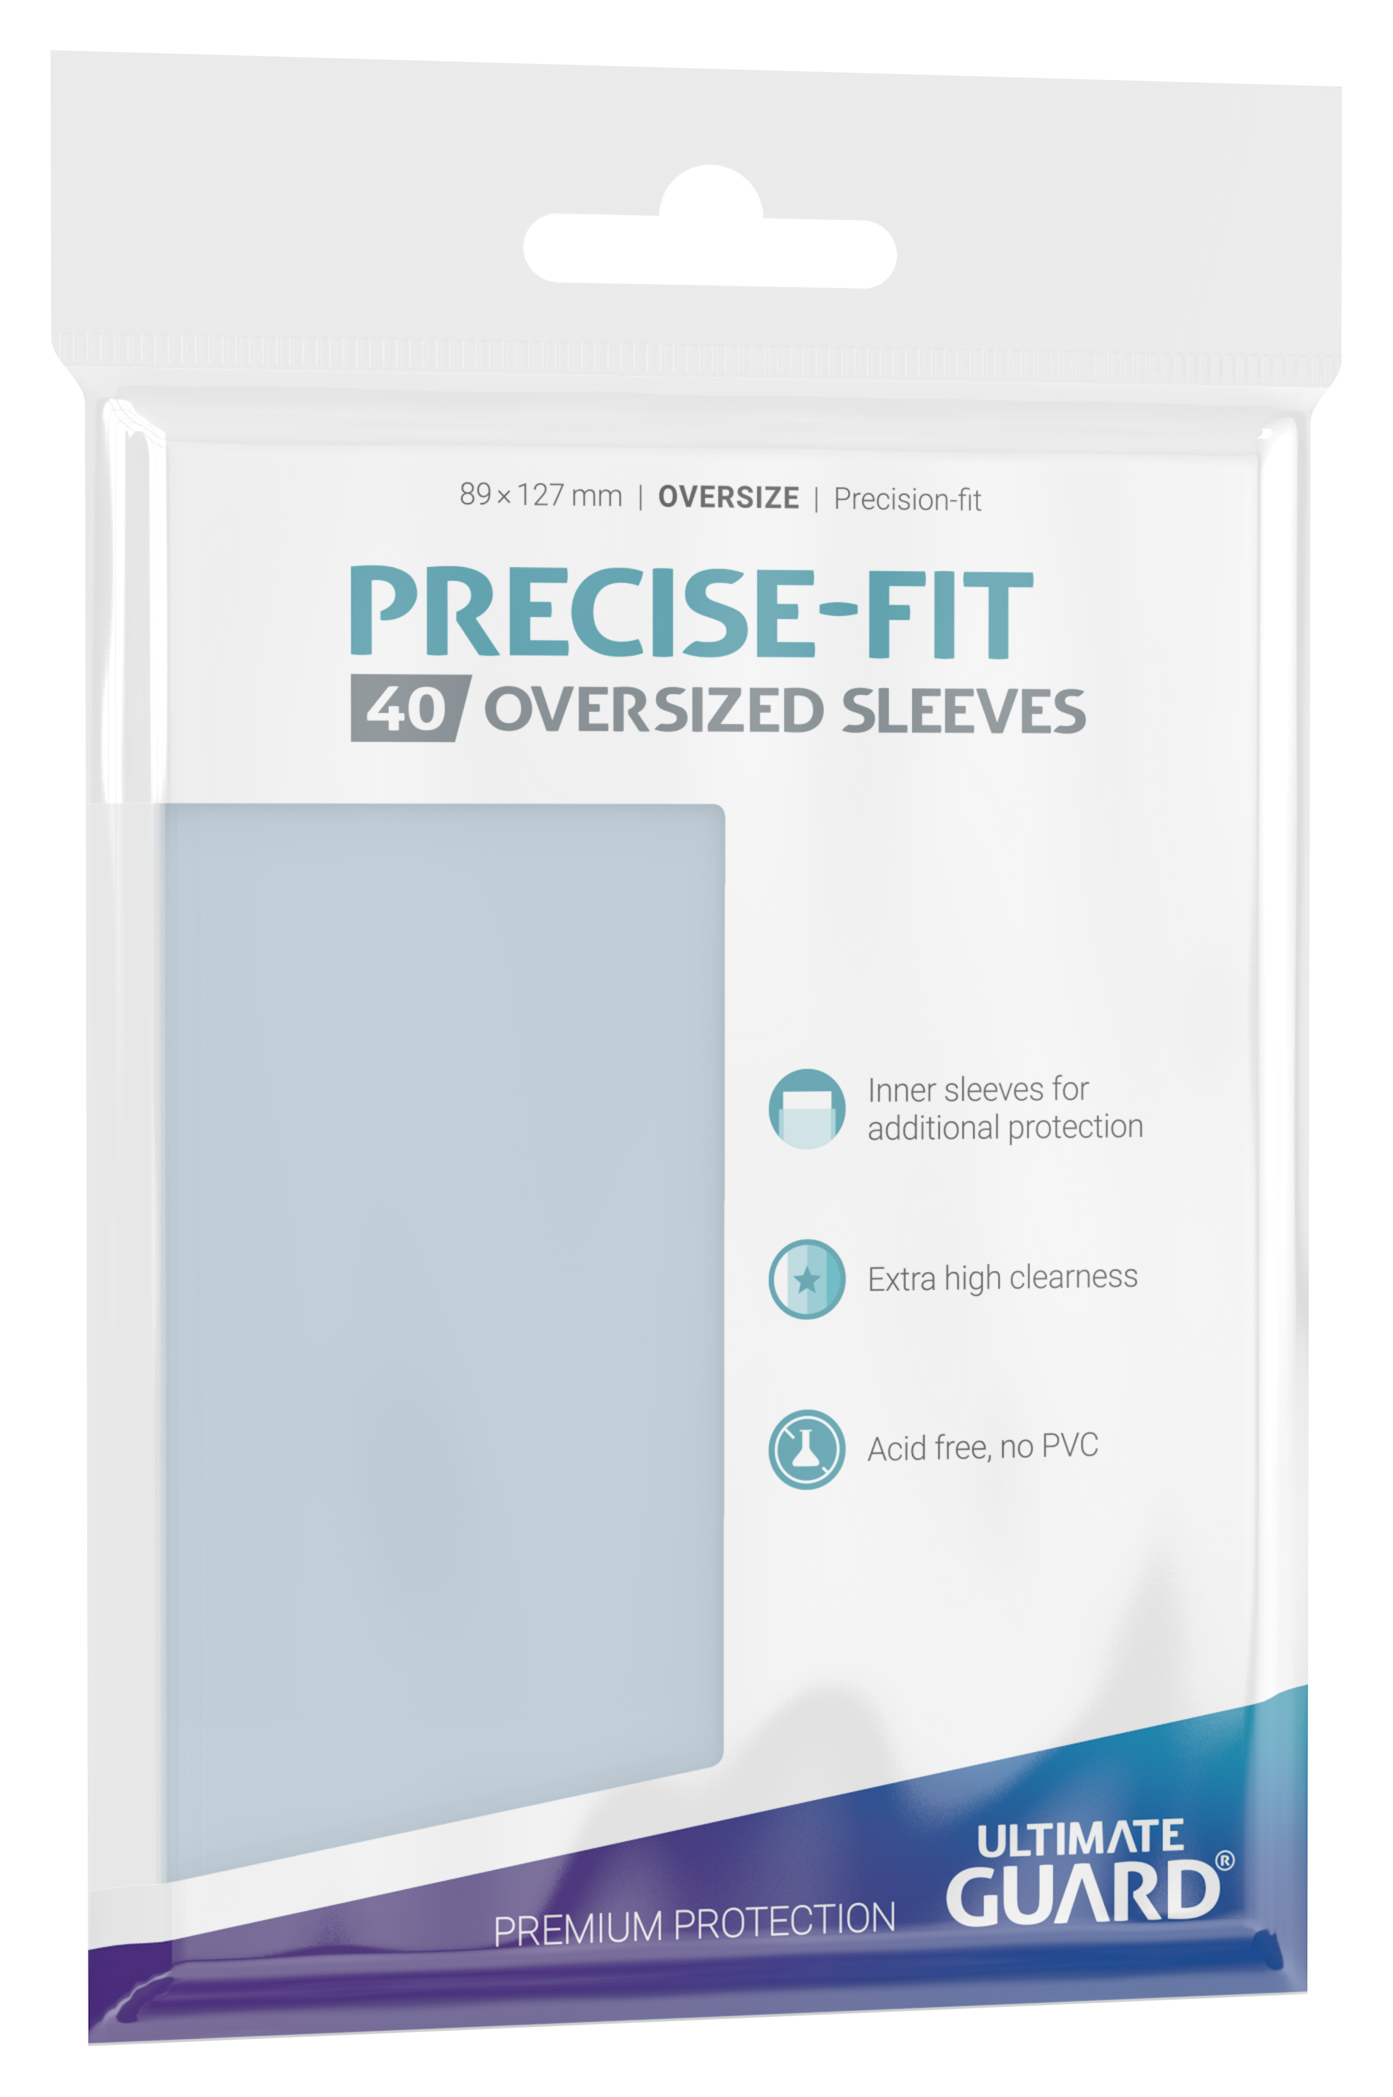 Precise-Fit Sleeves